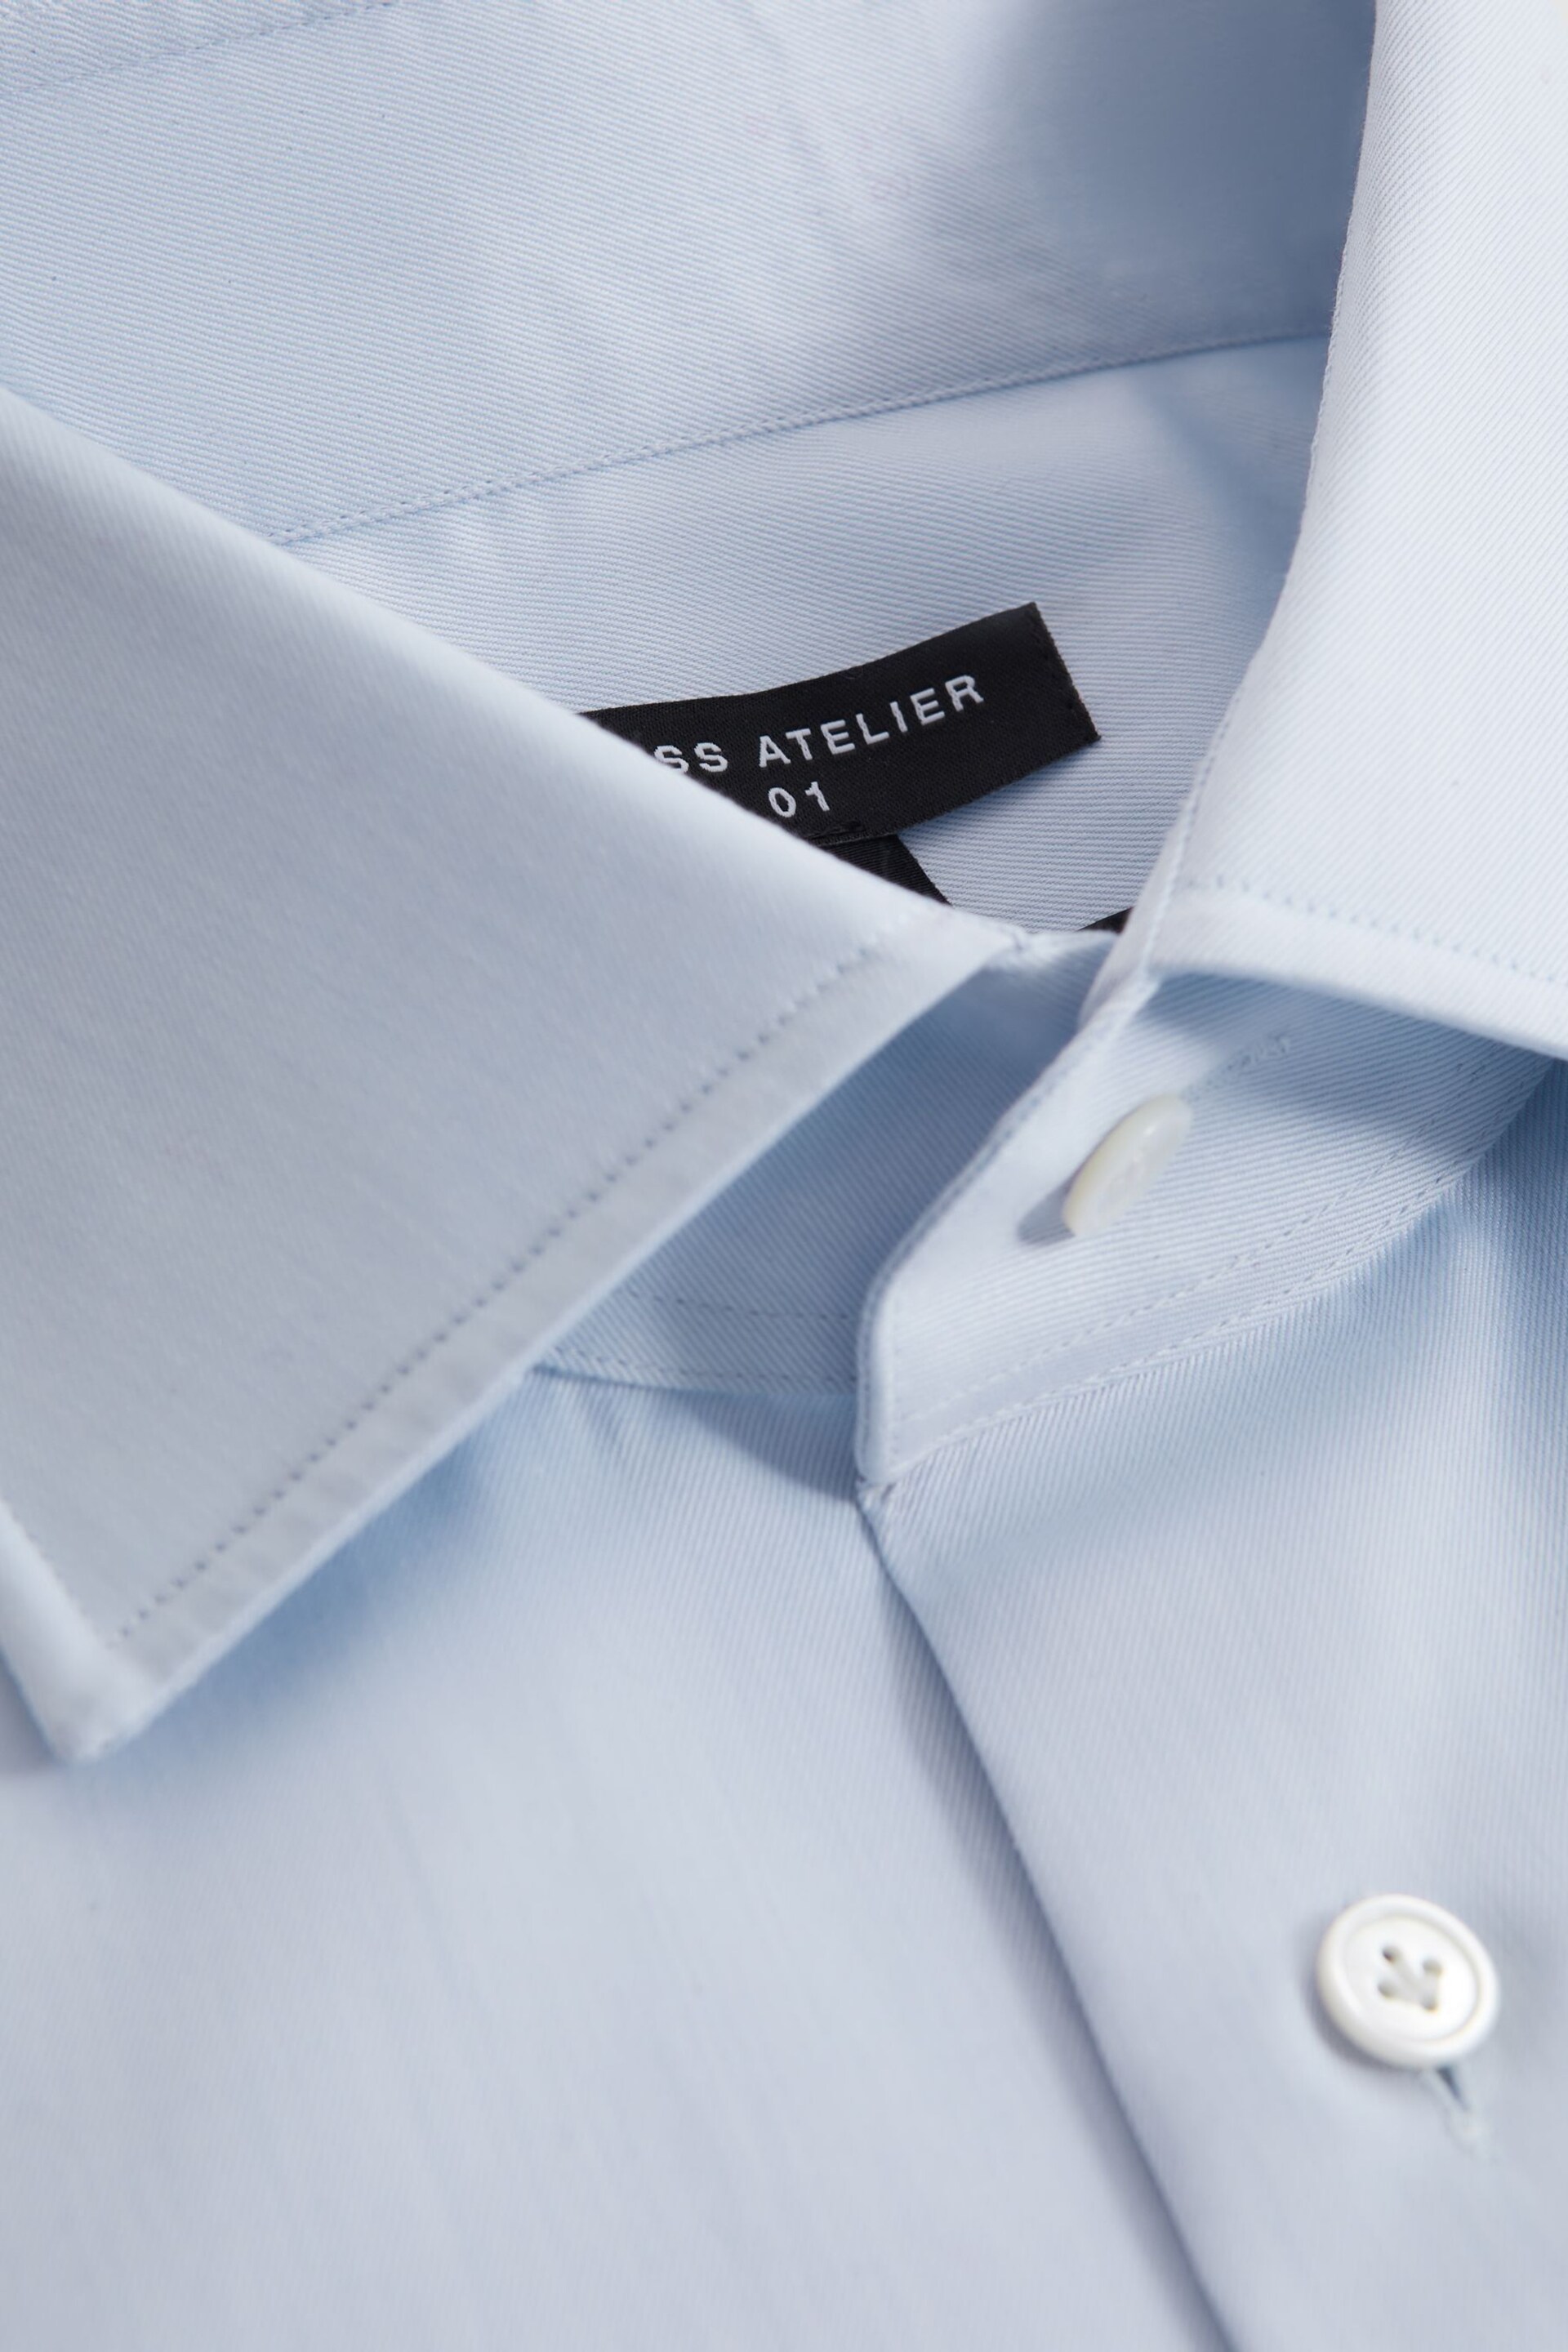 Atelier Cotton Mother of Pearl Shirt - Image 6 of 7